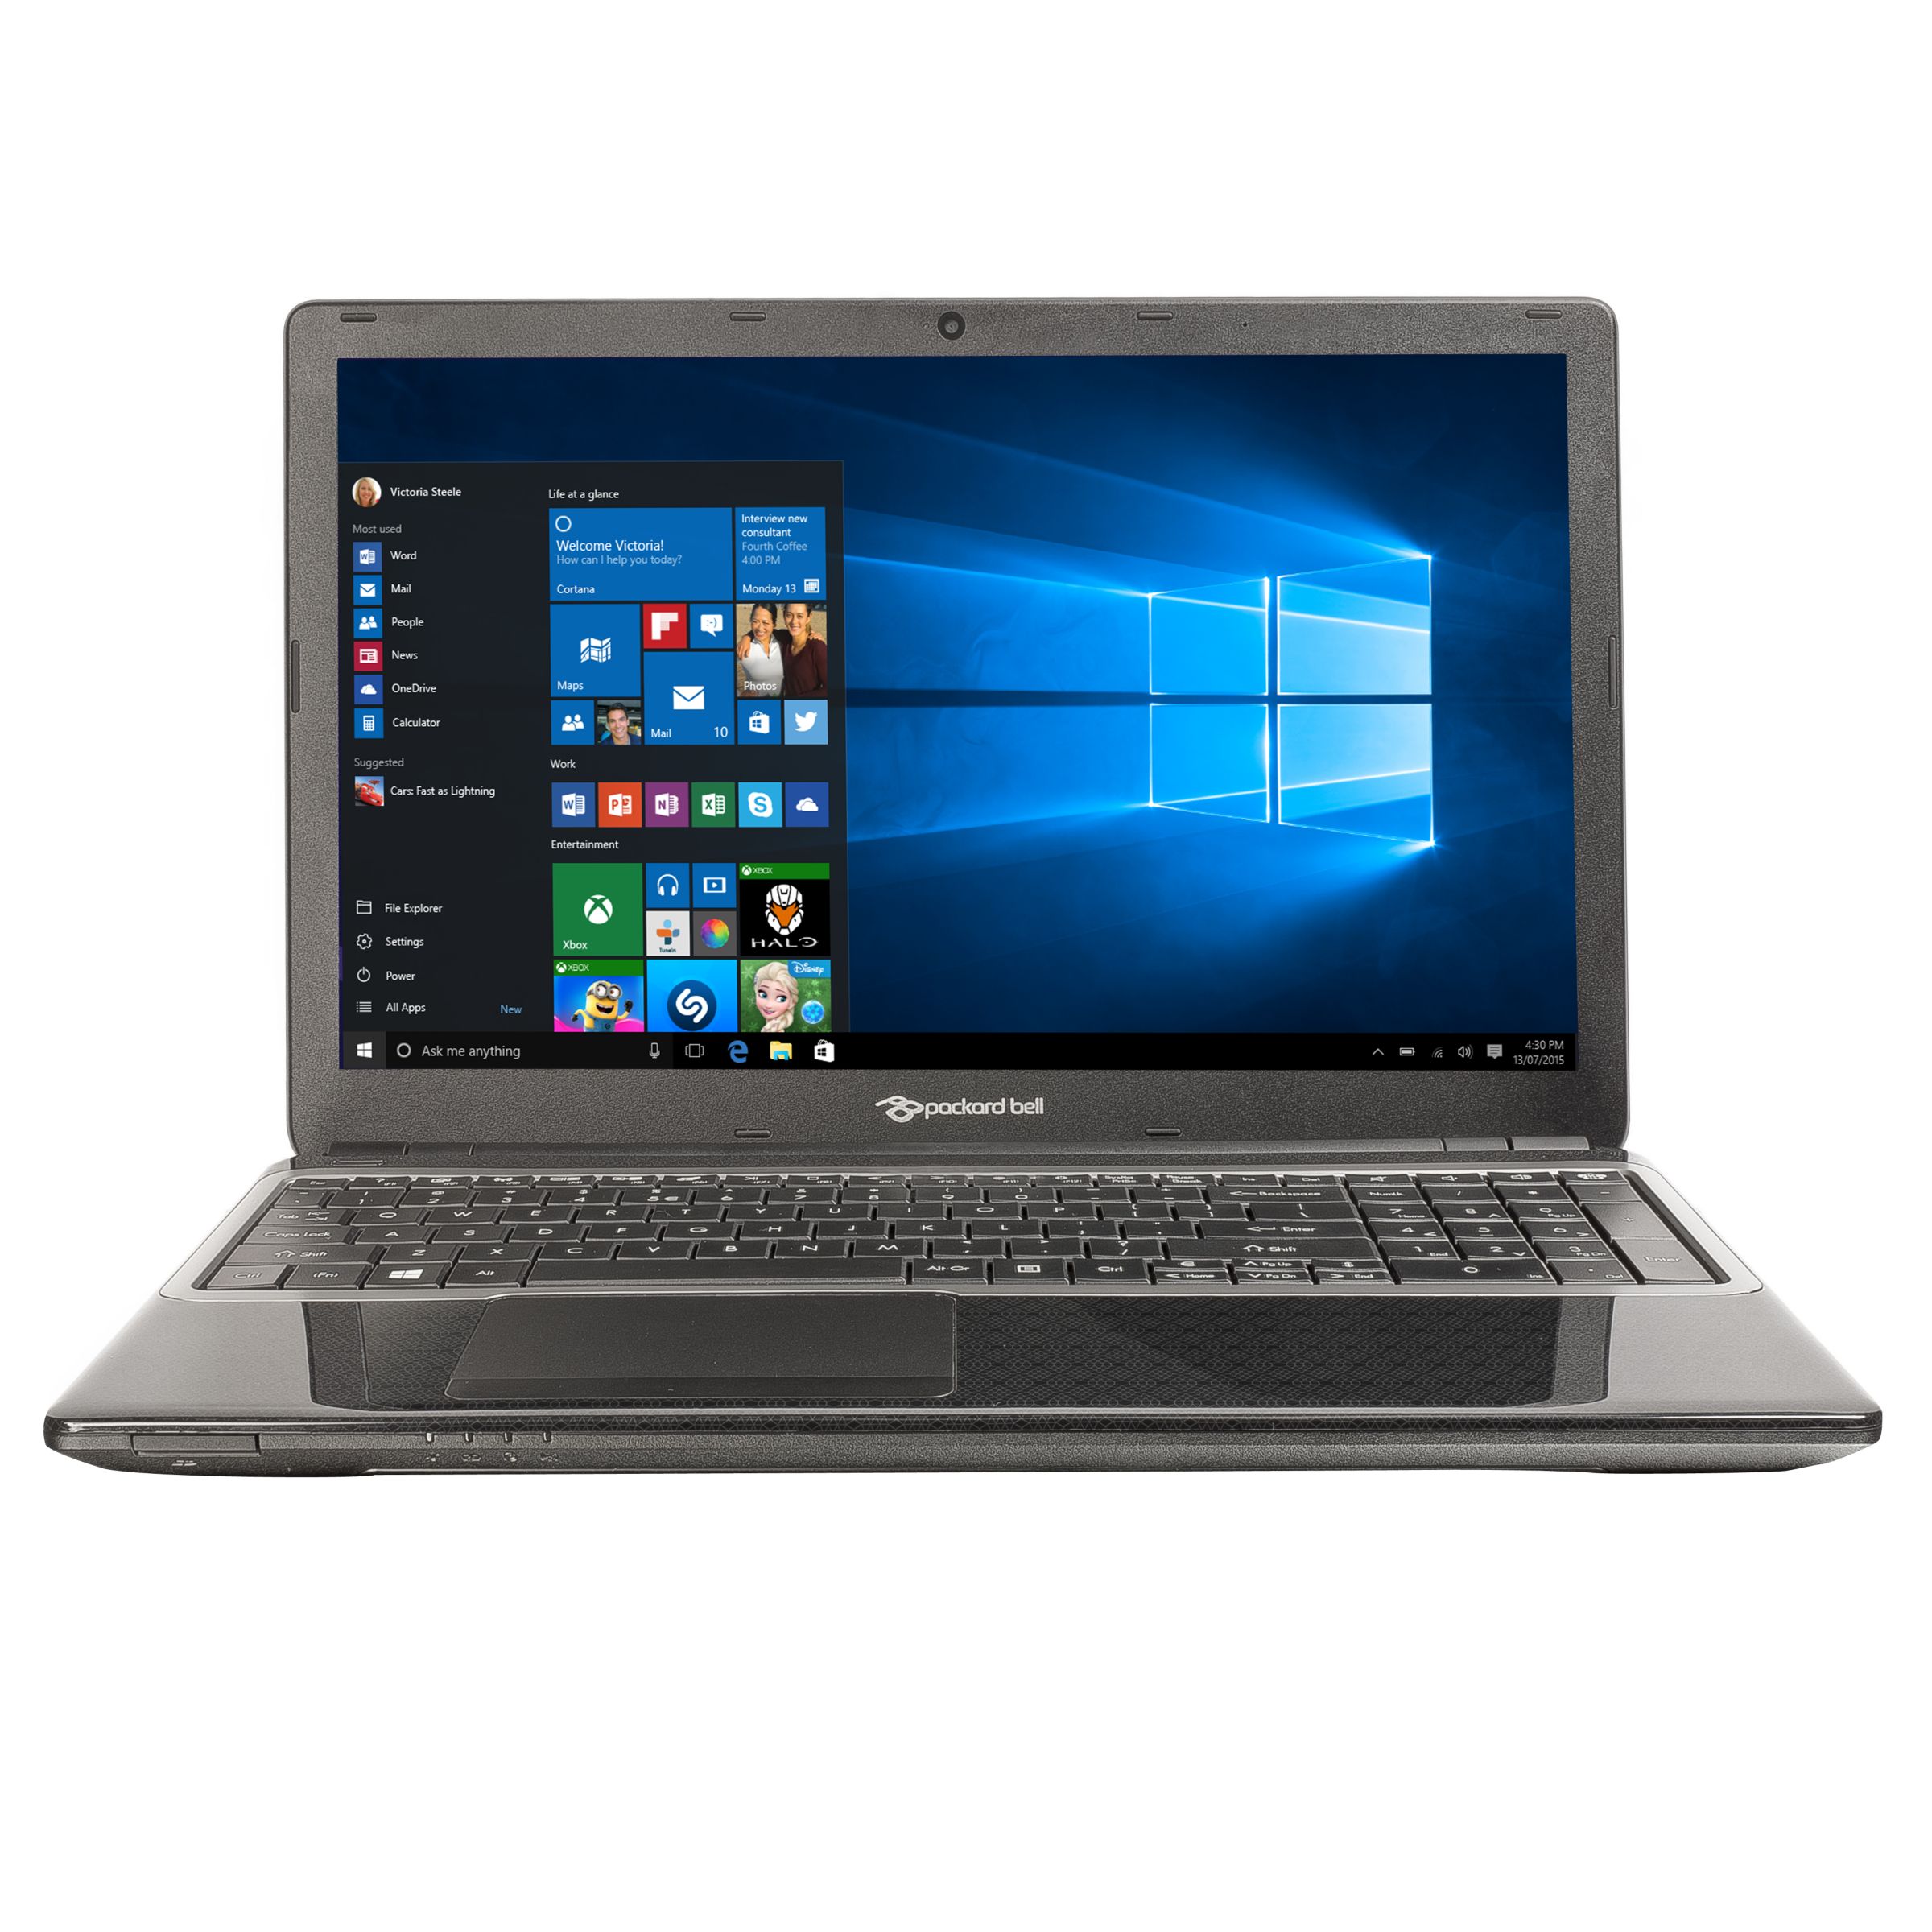 Hammer Isolere At understrege Packard Bell EasyNote TE69 Laptop, Intel Core i3, 4GB RAM, 1TB, 15.6"